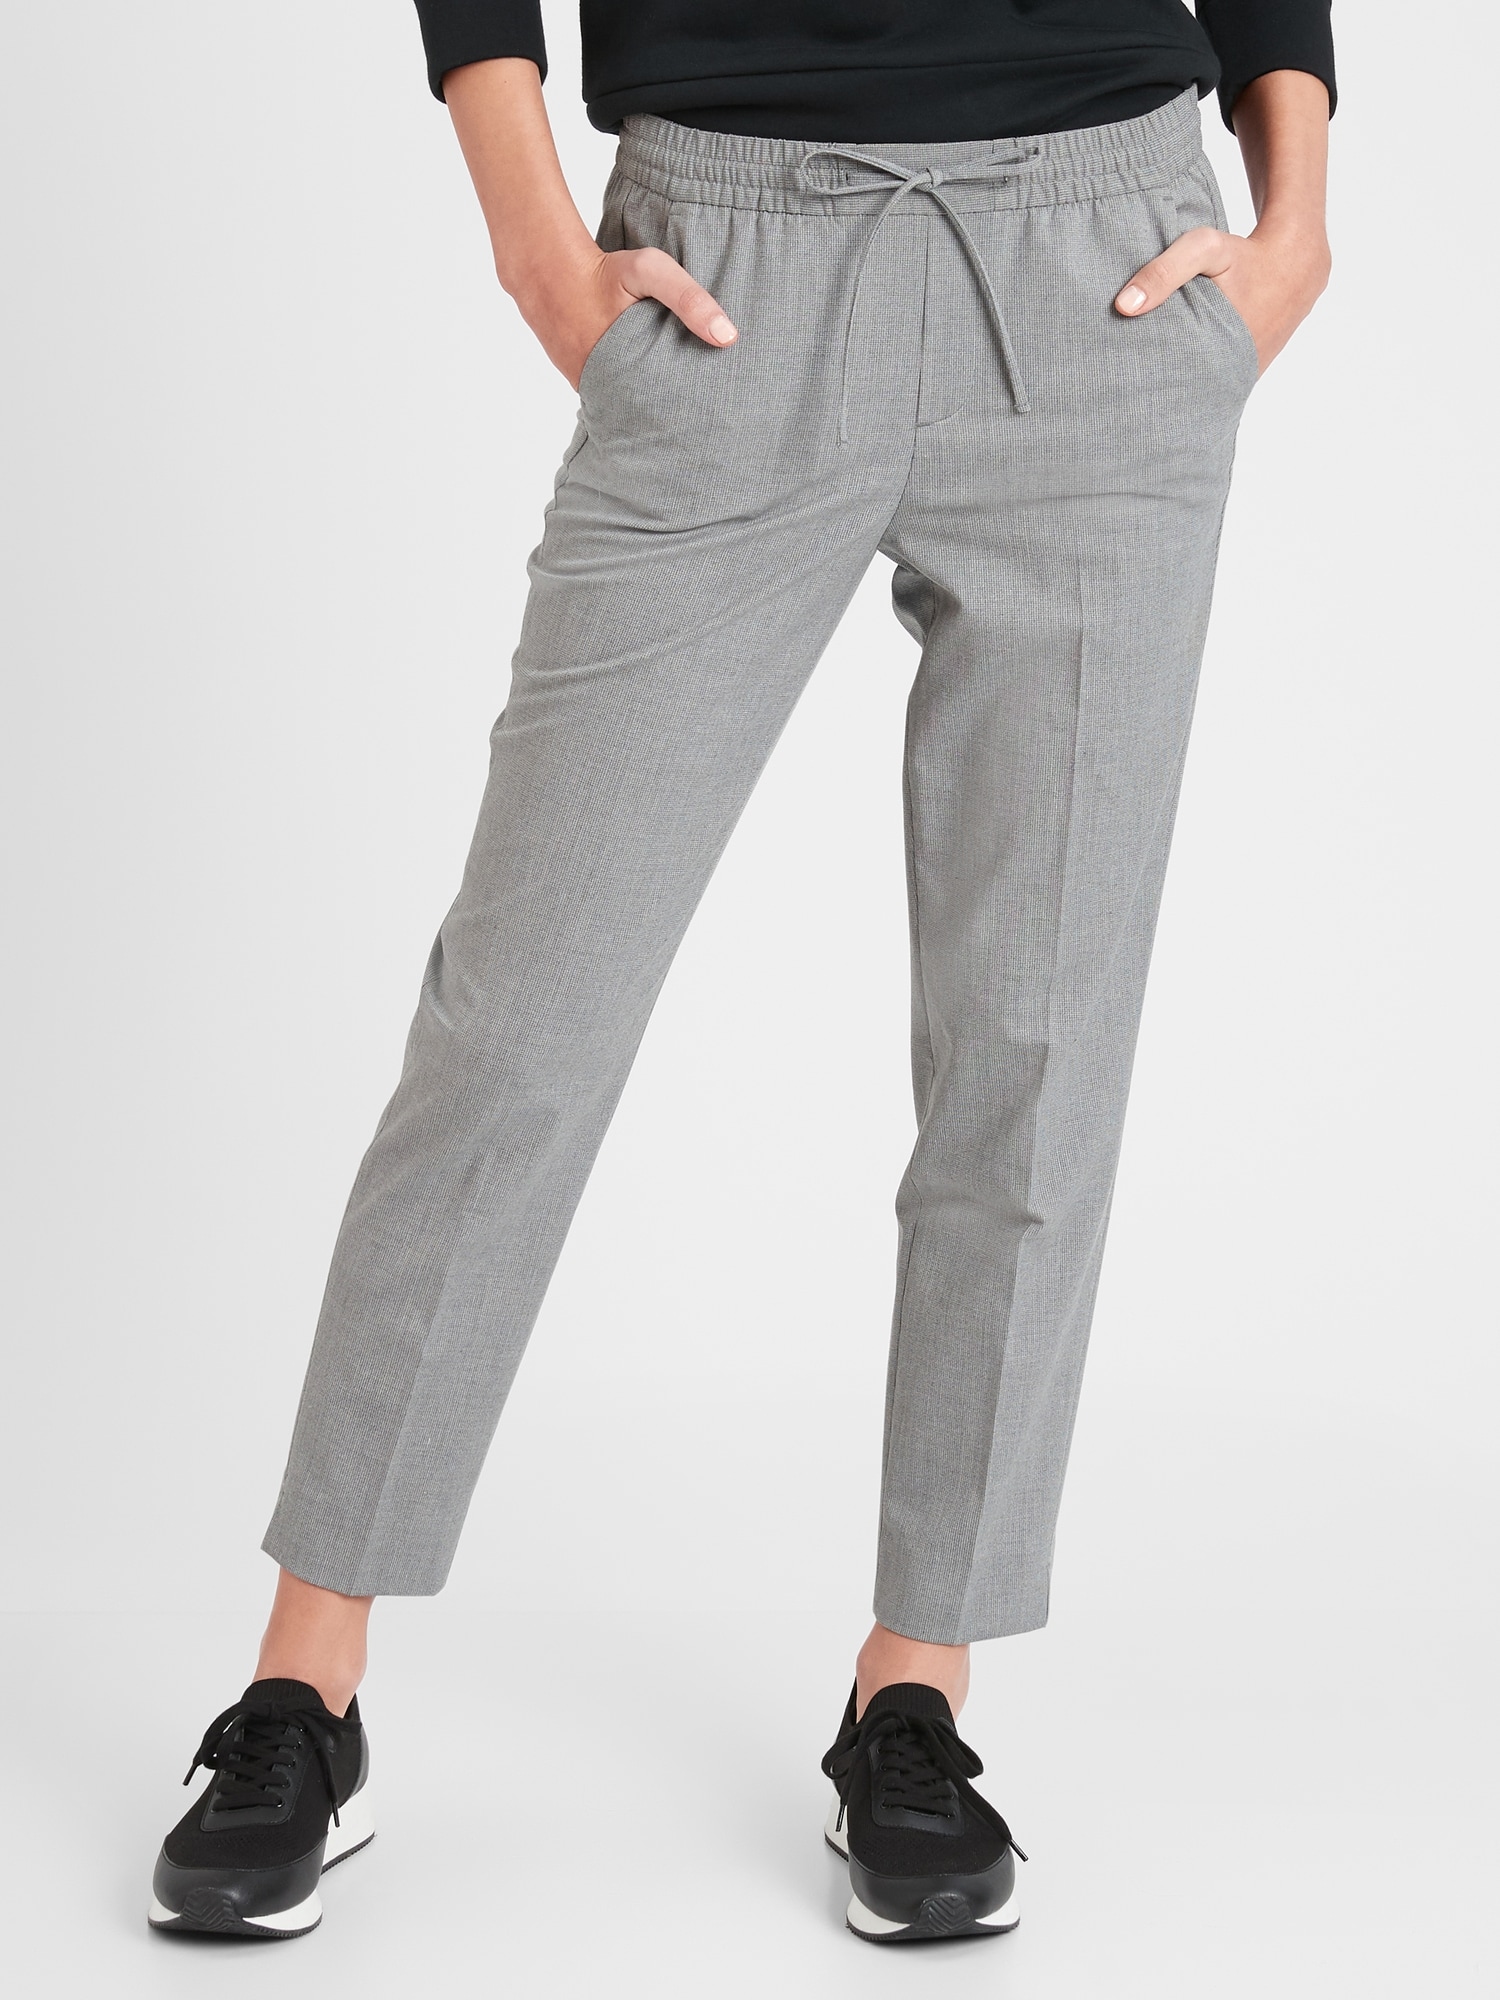 Hayden Tie-Waist Recycled Pull-On Soft Ankle Pant